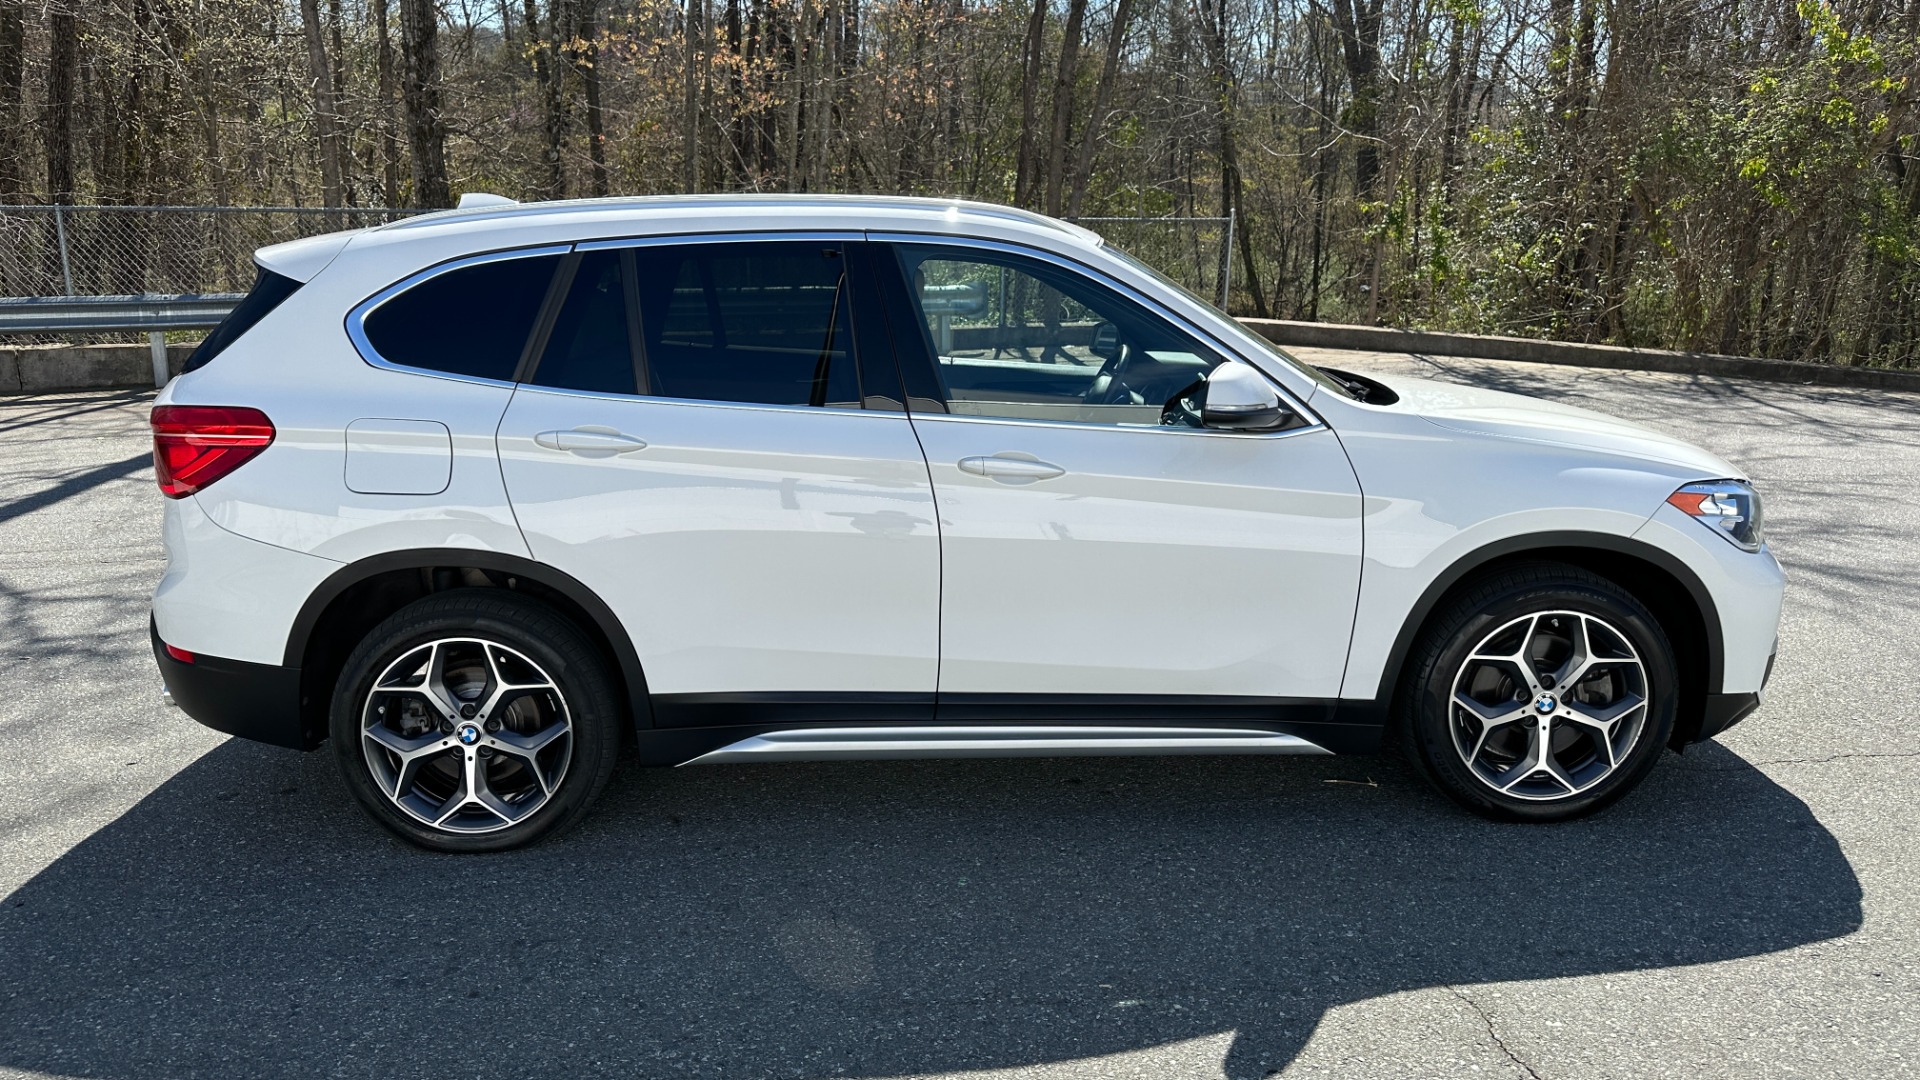 Used 2018 BMW X1 xDrive28i / HEATED SEATS / BACKUP CAMERA / CARGO COVER for sale Sold at Formula Imports in Charlotte NC 28227 3